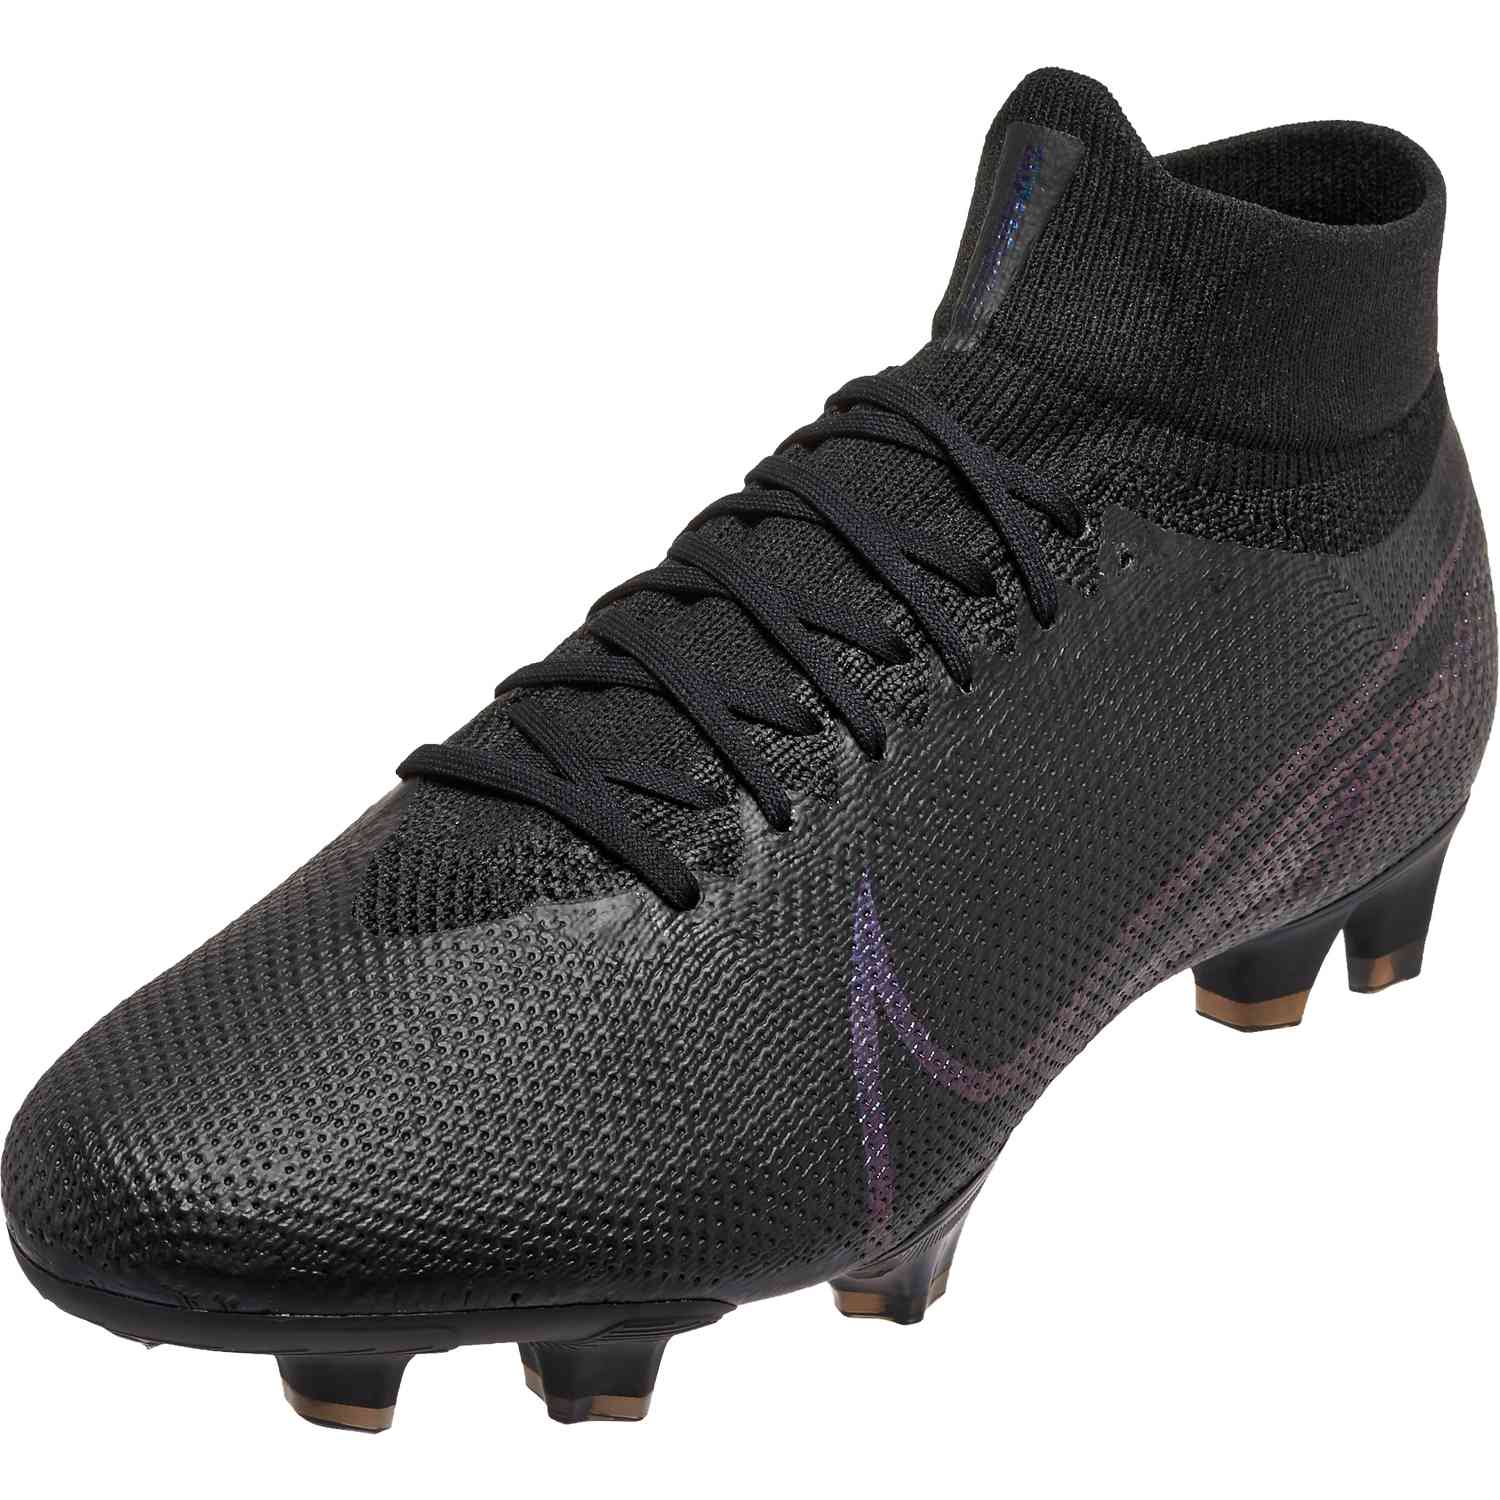 all black mercurial superfly